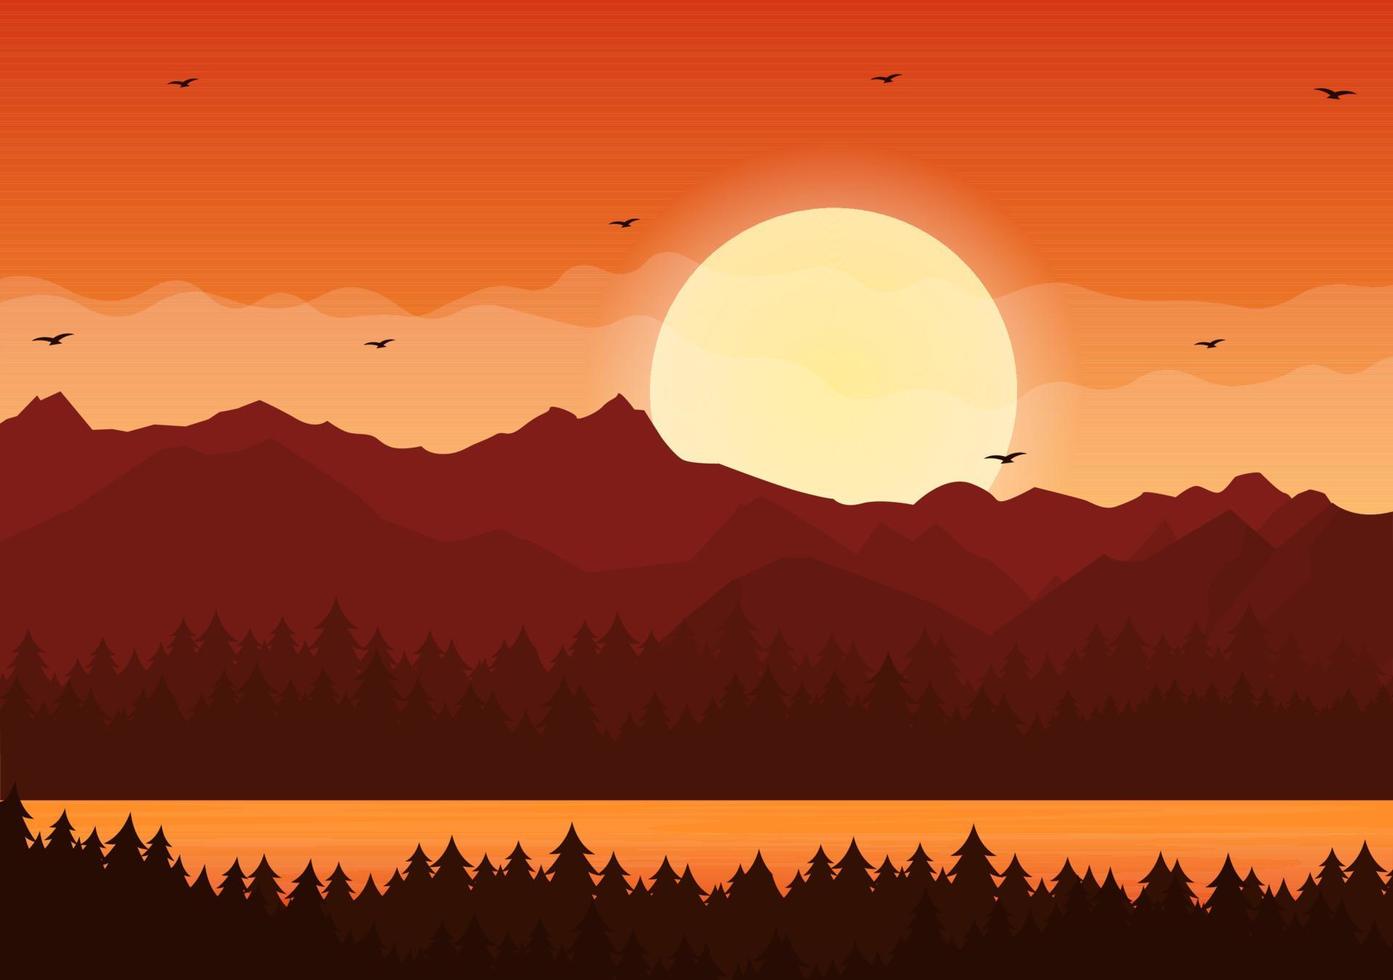 Sunset Landscape of Mountains, Wilderness, Sands, Lake and Valley in Flat Wild Nature for Poster, Banner or Background Illustration vector